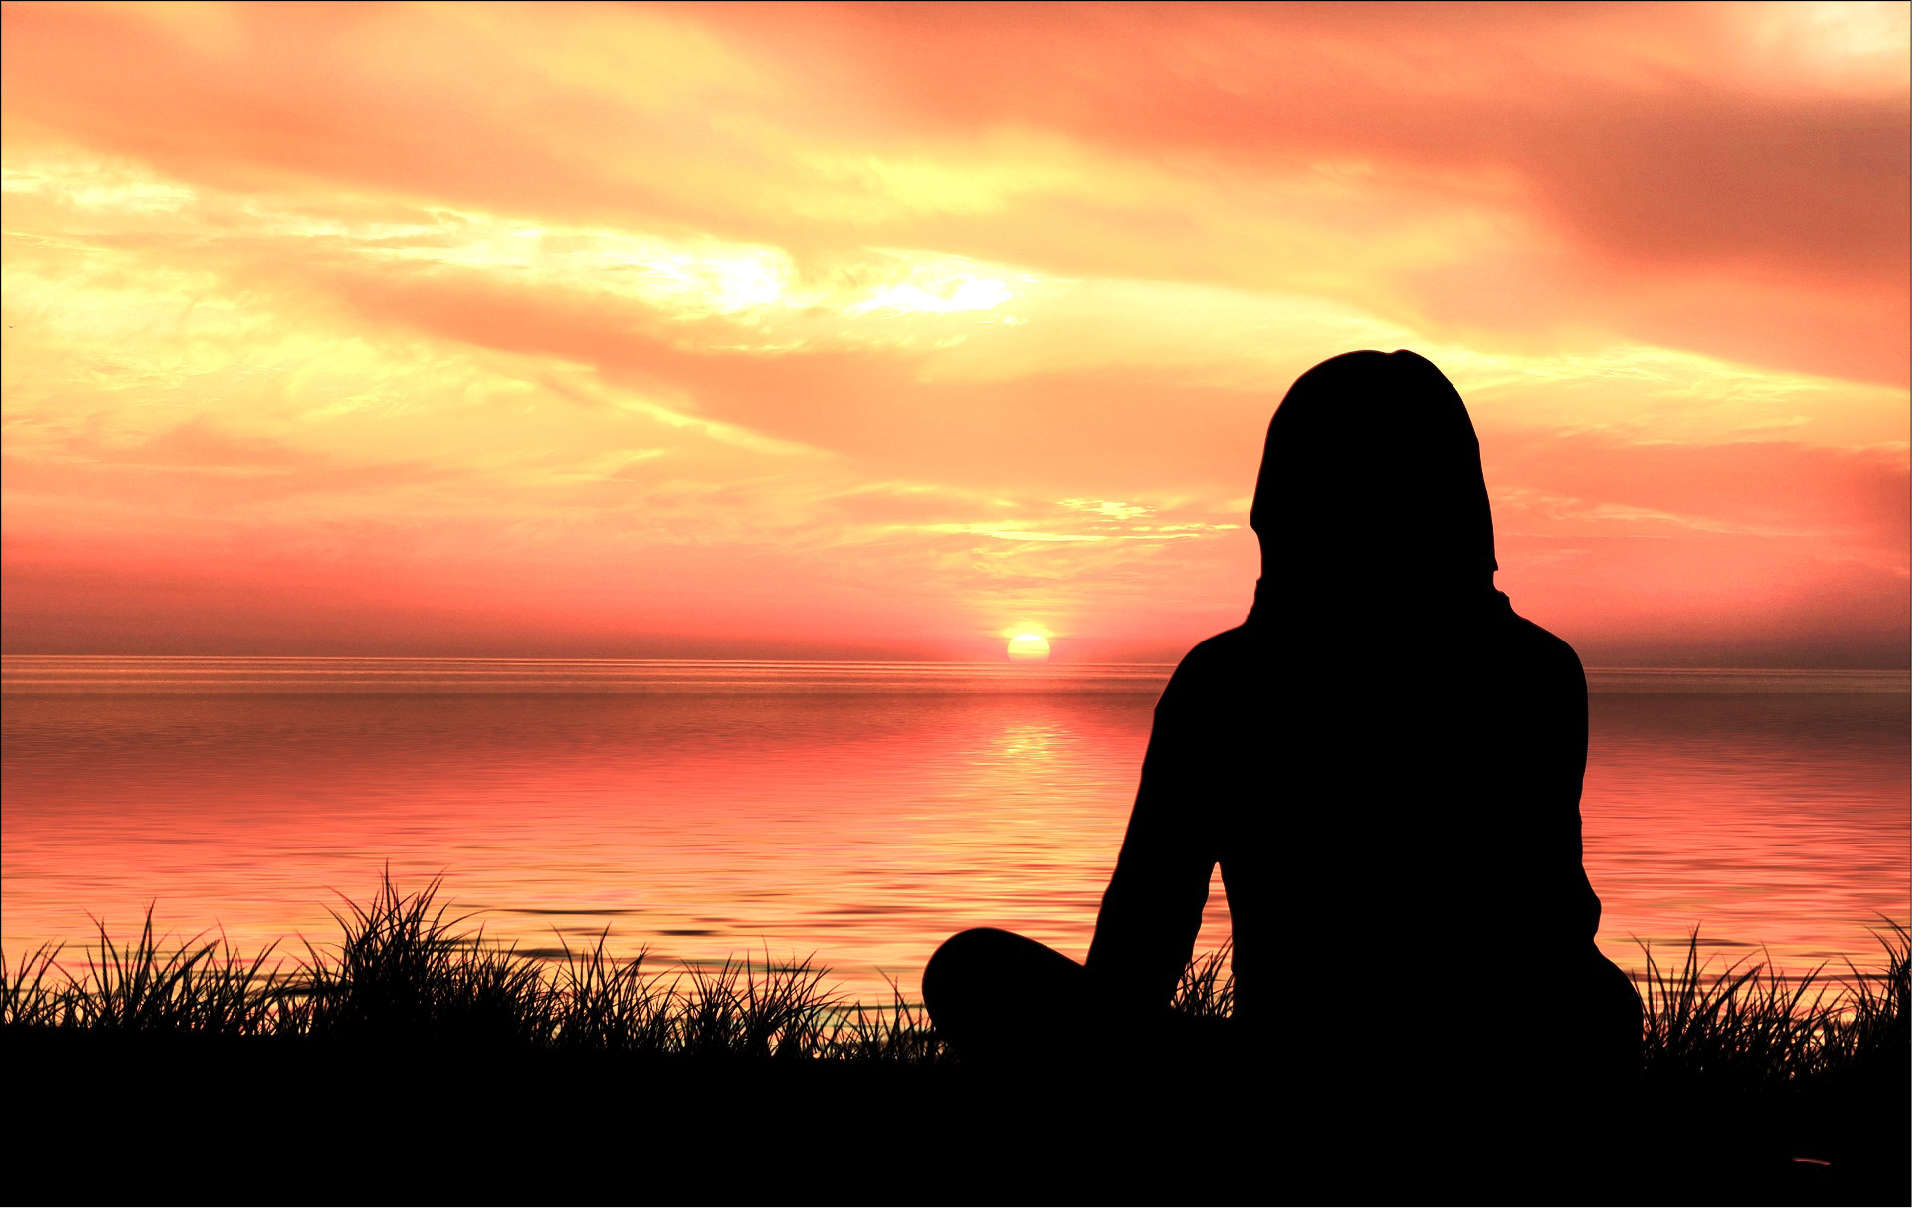 MEDITATION HELPS HEAL PAINFUL PAST EXPERIENCES